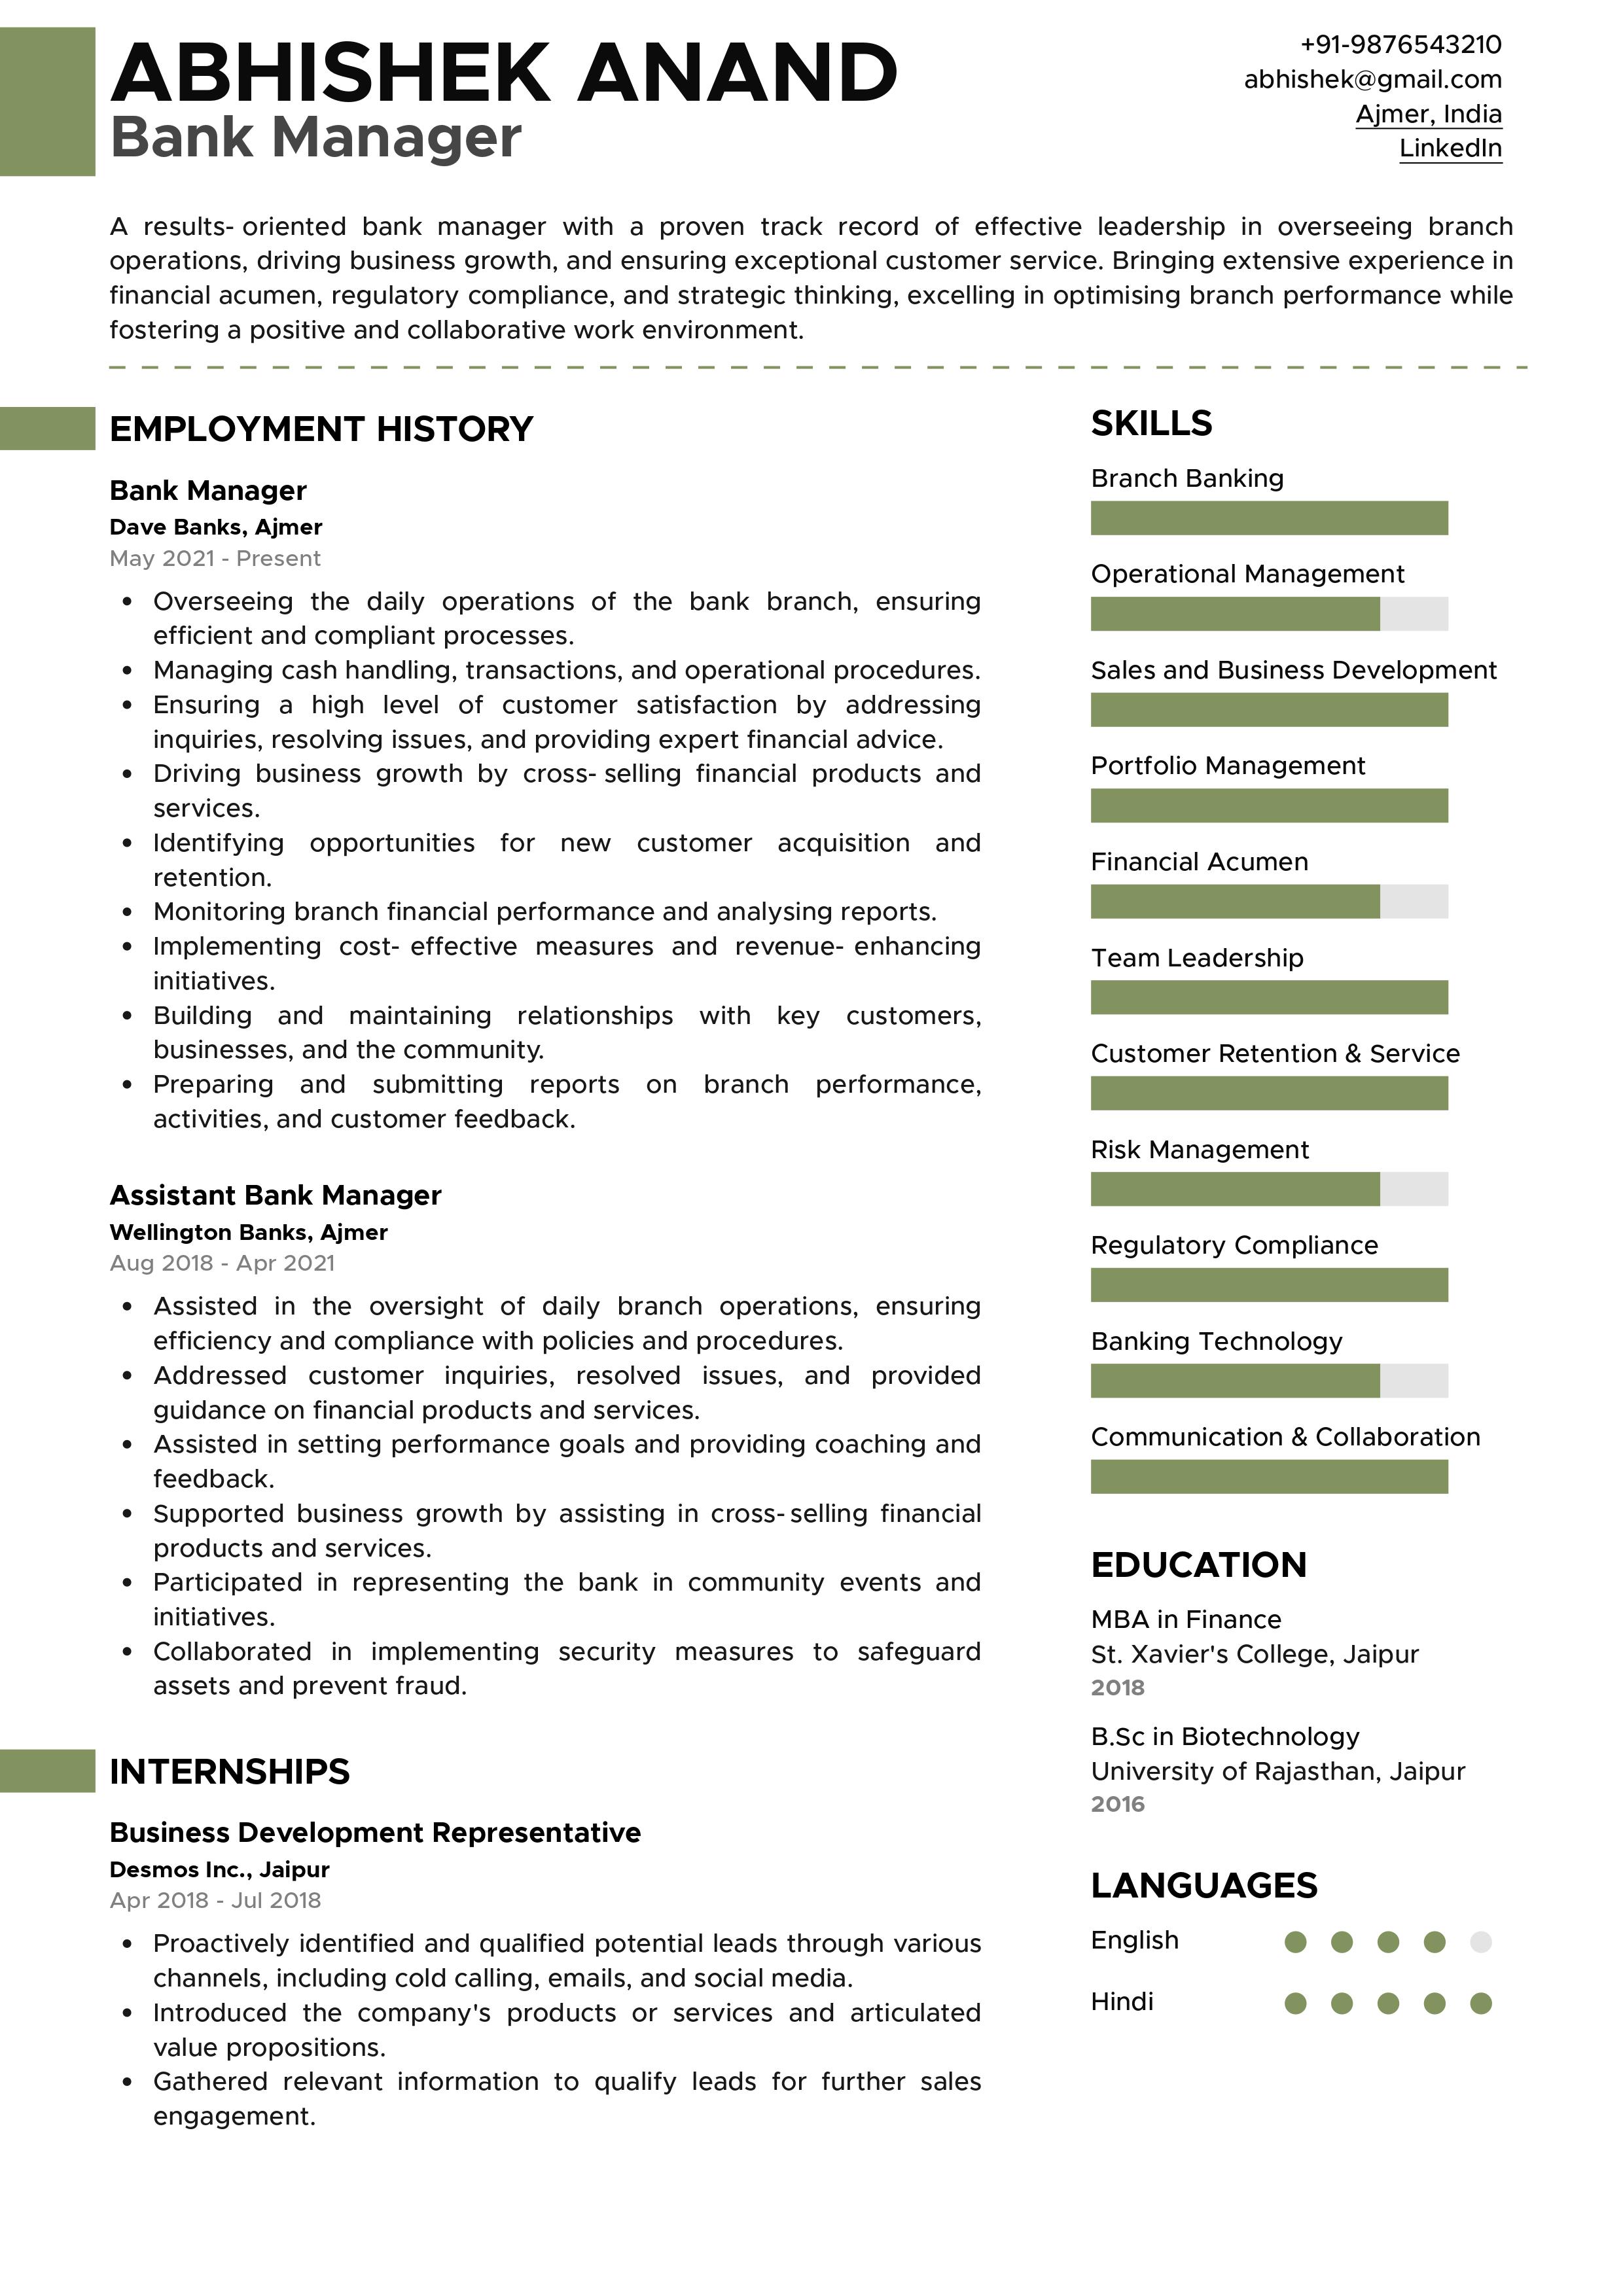 Sample Resume of Bank Manager | Free Resume Templates & Samples on Resumod.co